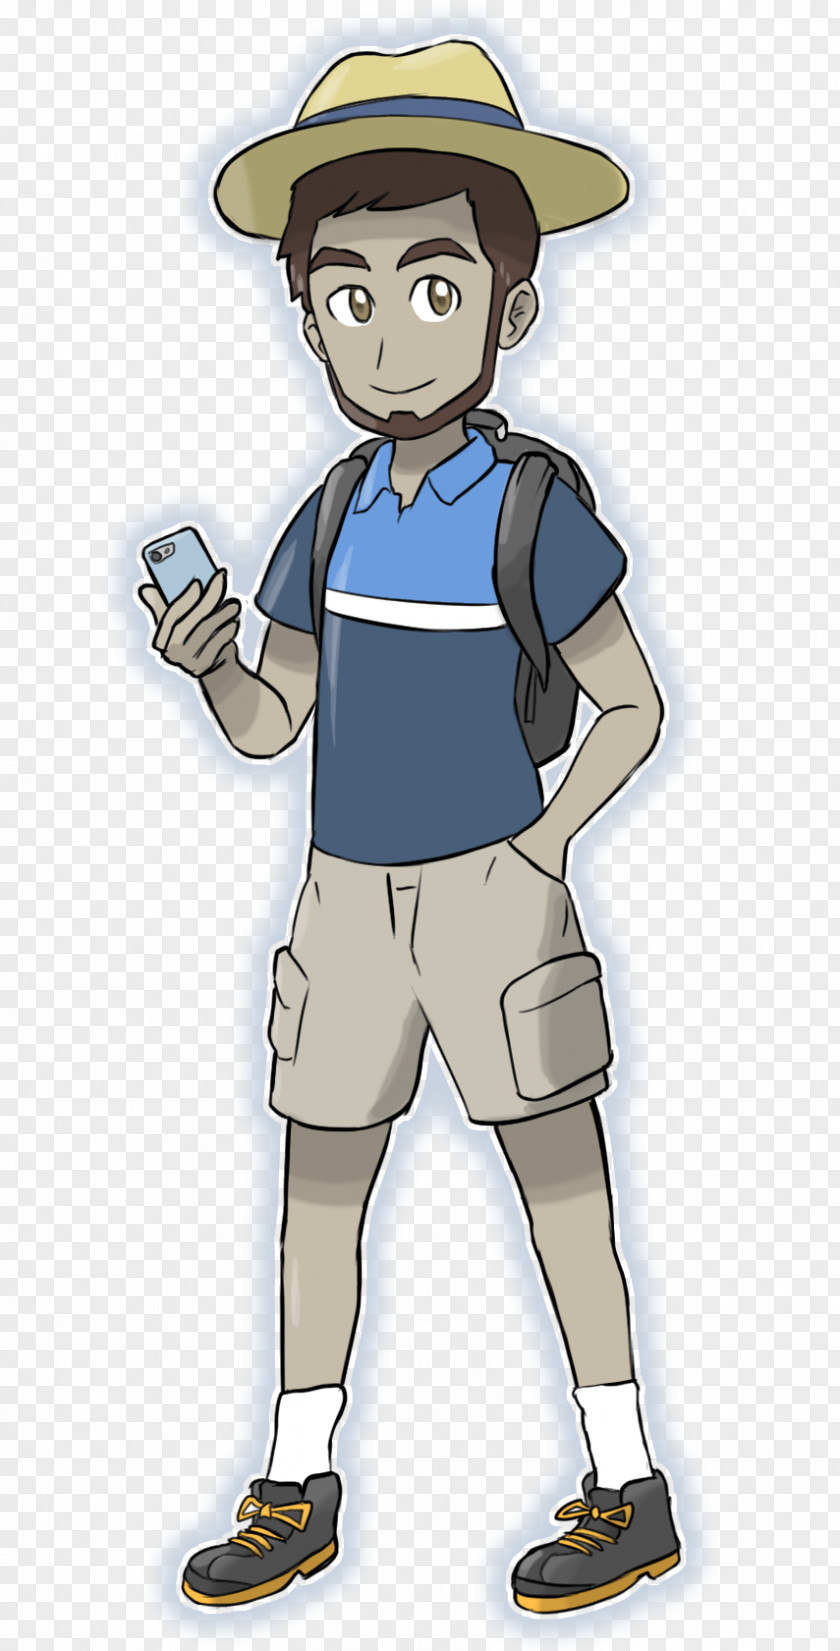 Pokemon Go Pokémon GO Red And Blue Character Trainer PNG